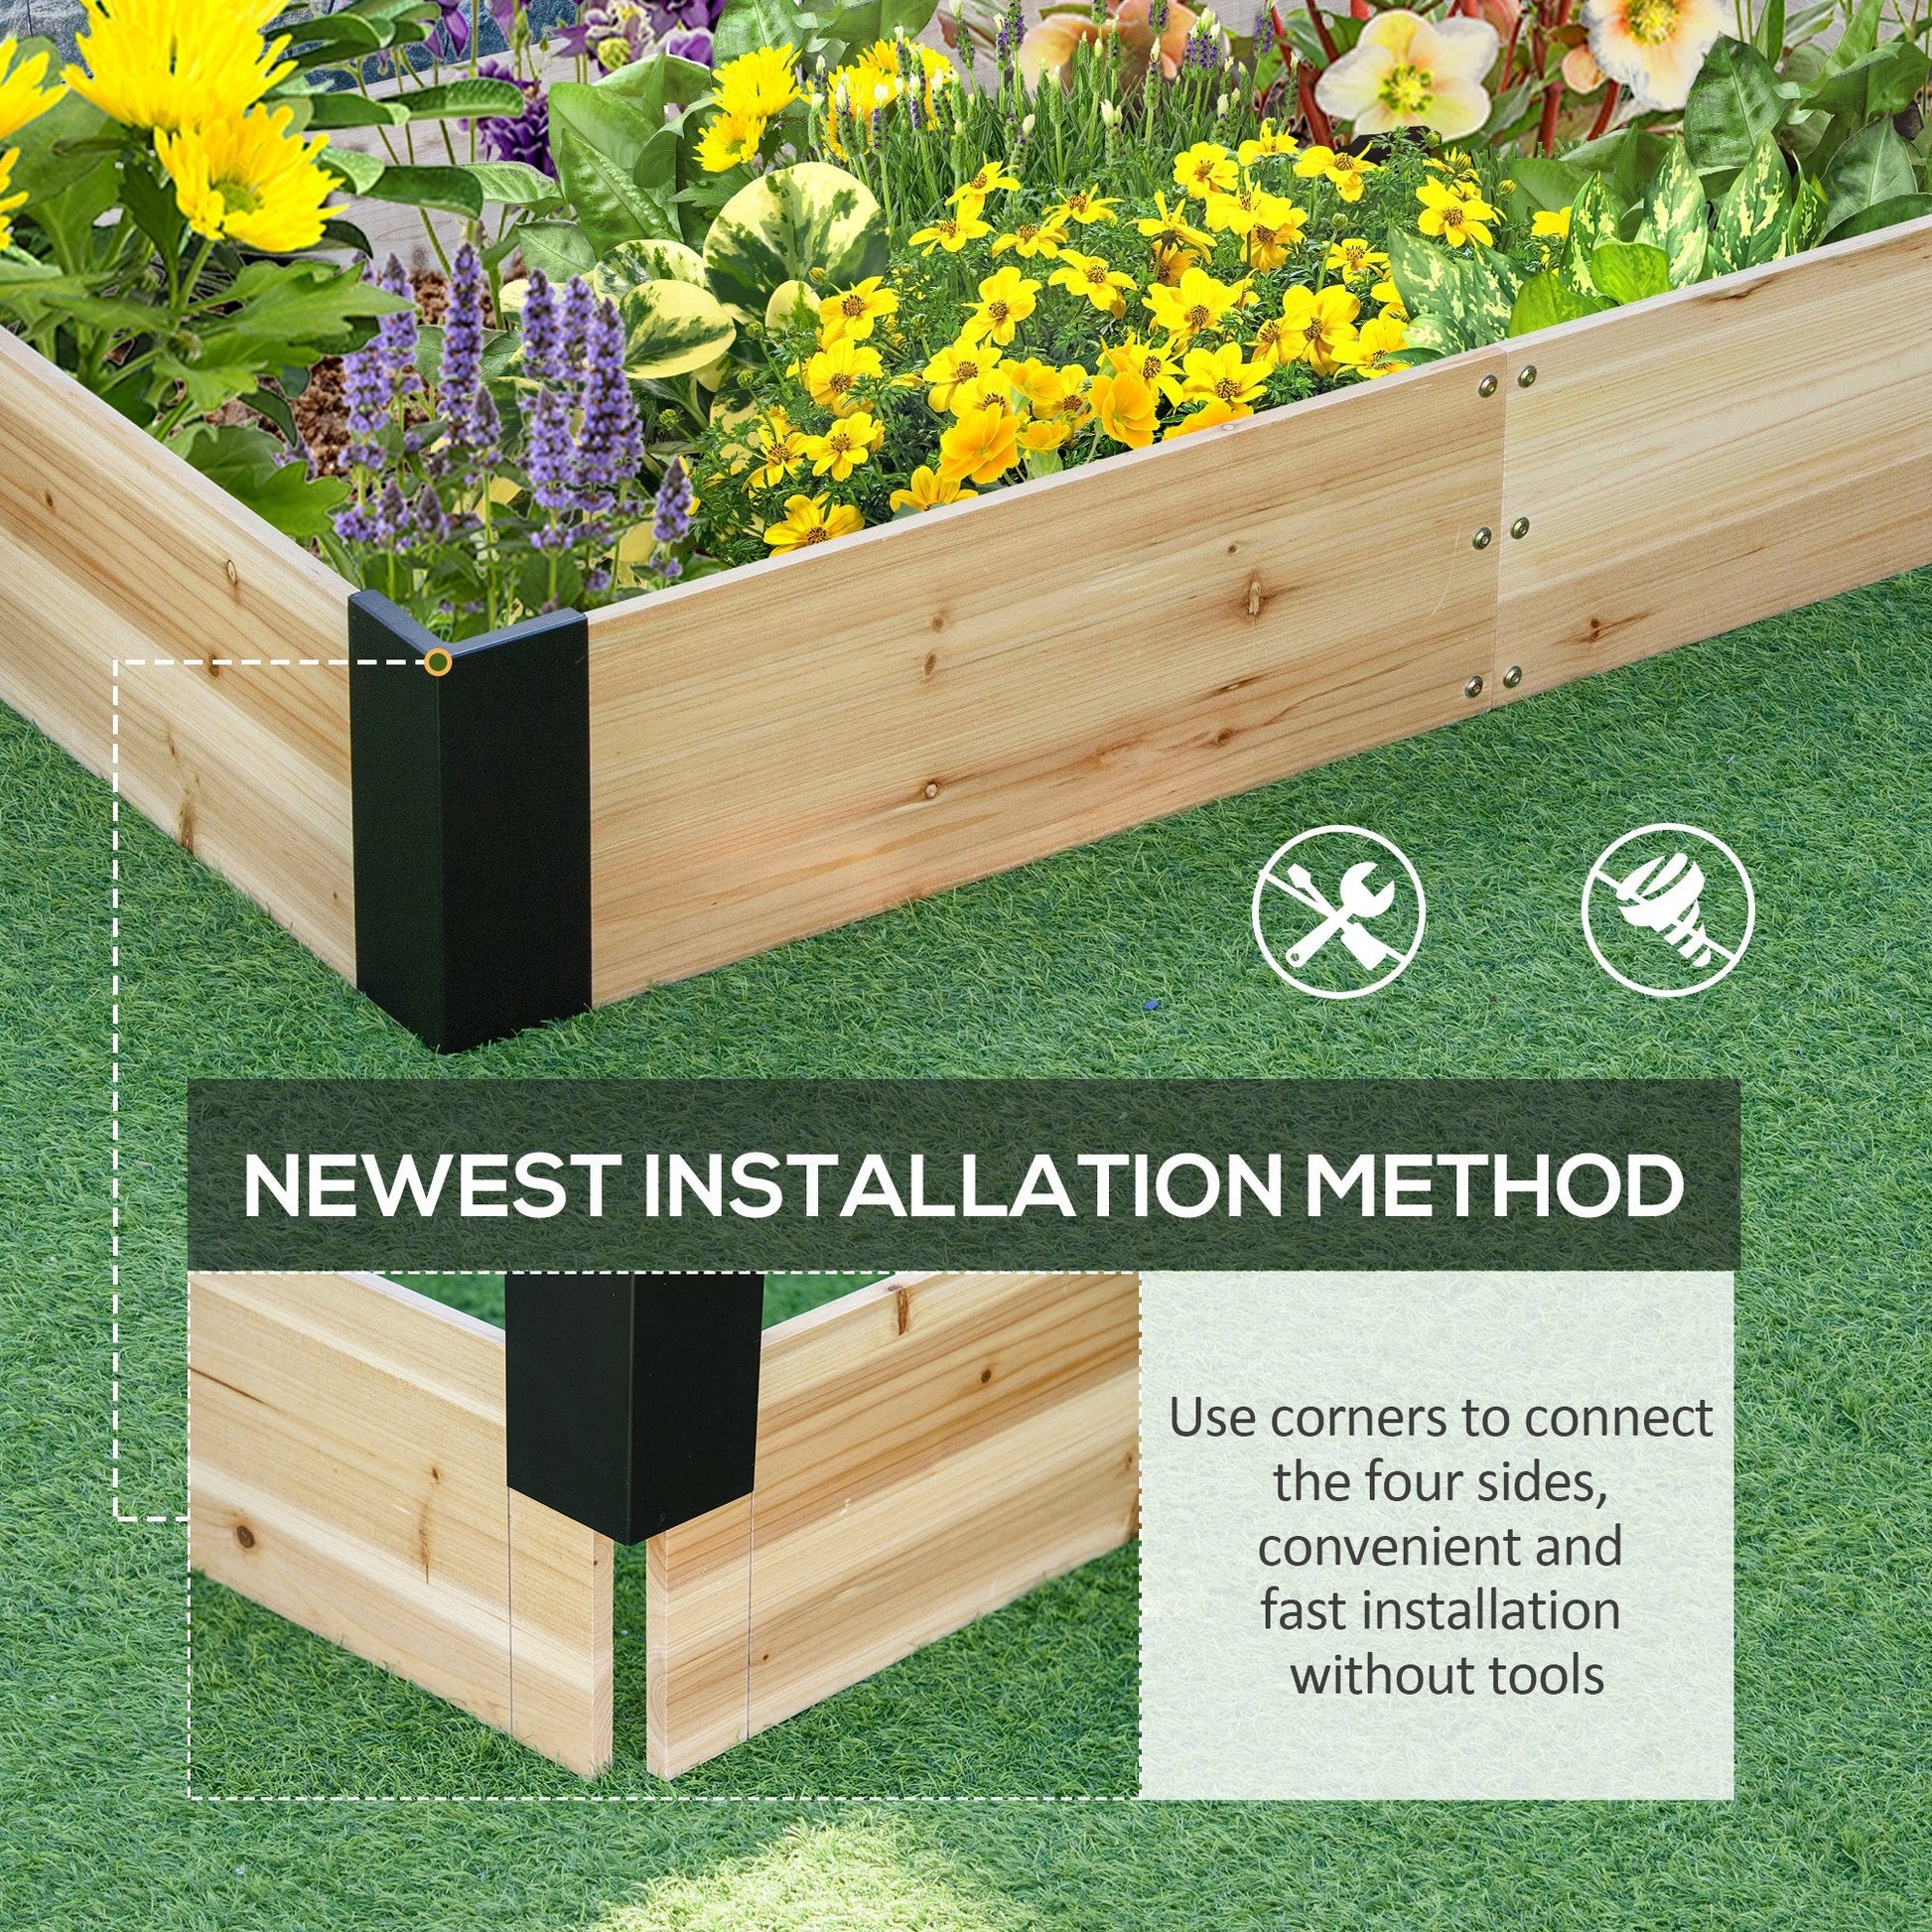 63" x 32" Raised Garden Bed with Metal Corner Bracket, Easy to Install Planter Box for Growing Vegetables, Flowers, Fruits, Herbs, and Succulents at Gallery Canada